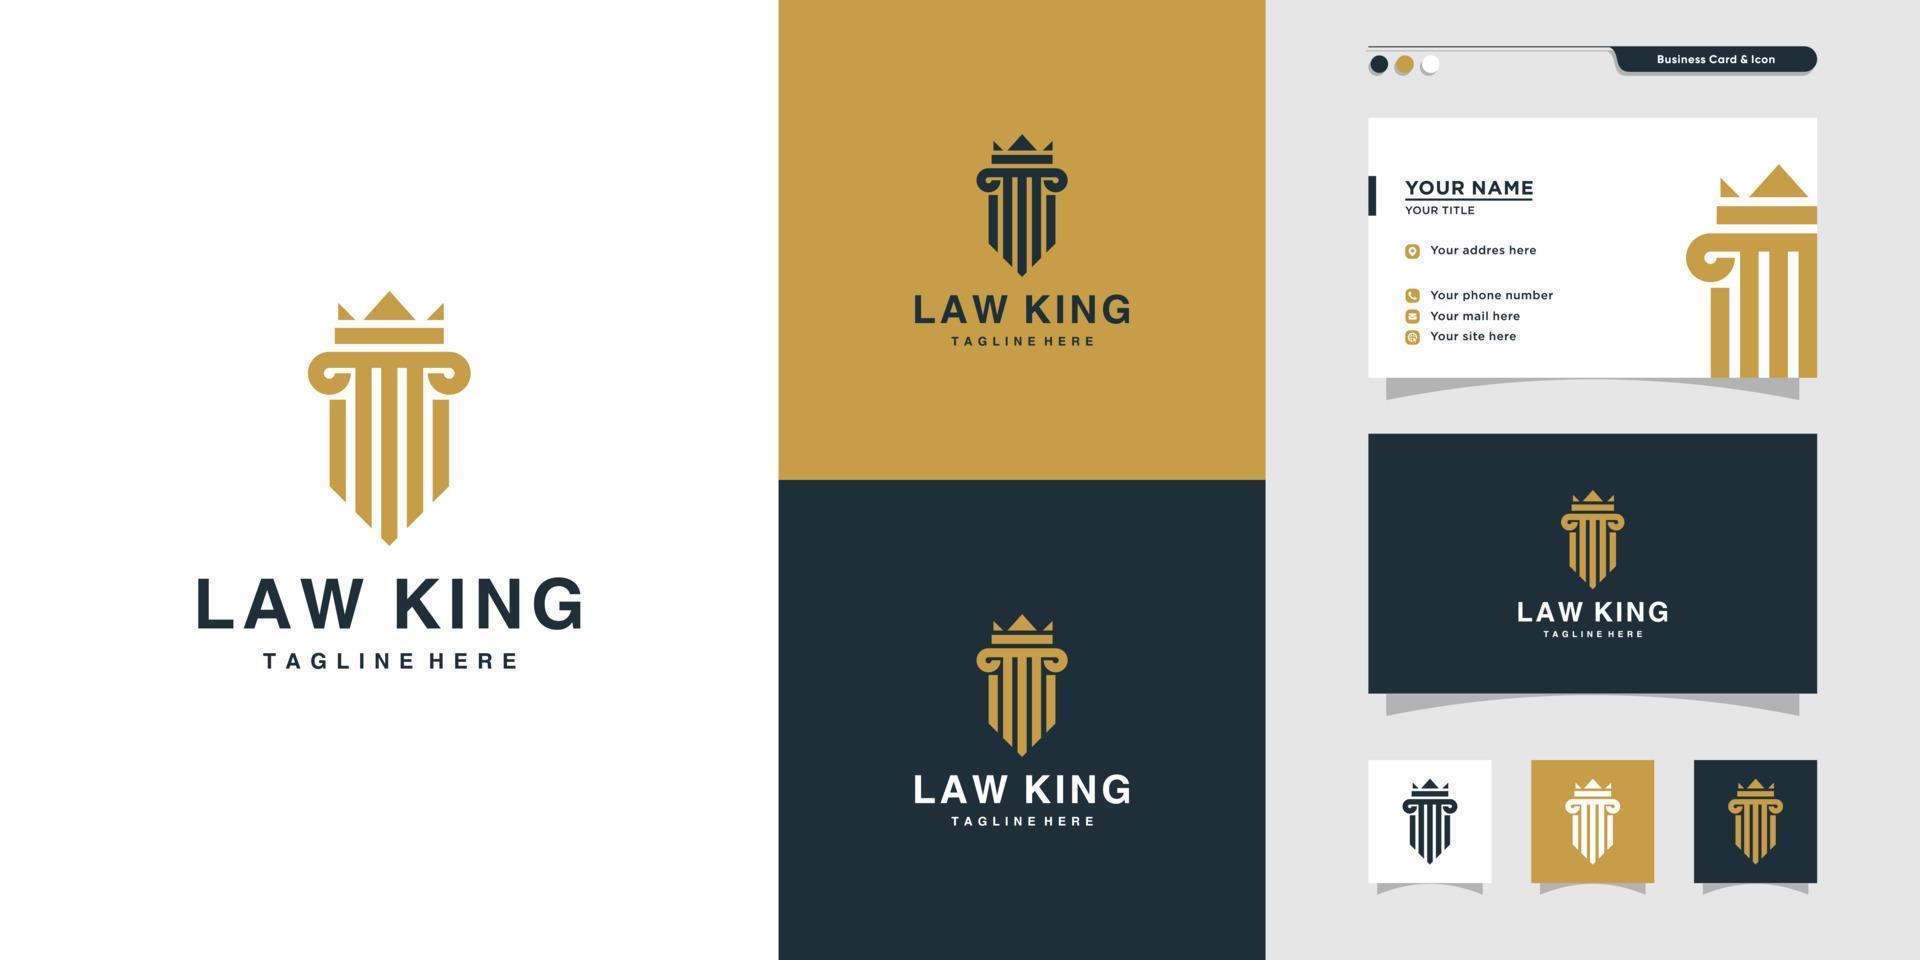 Justice law king logo and business card design. gold, firm, icon Premium Vector